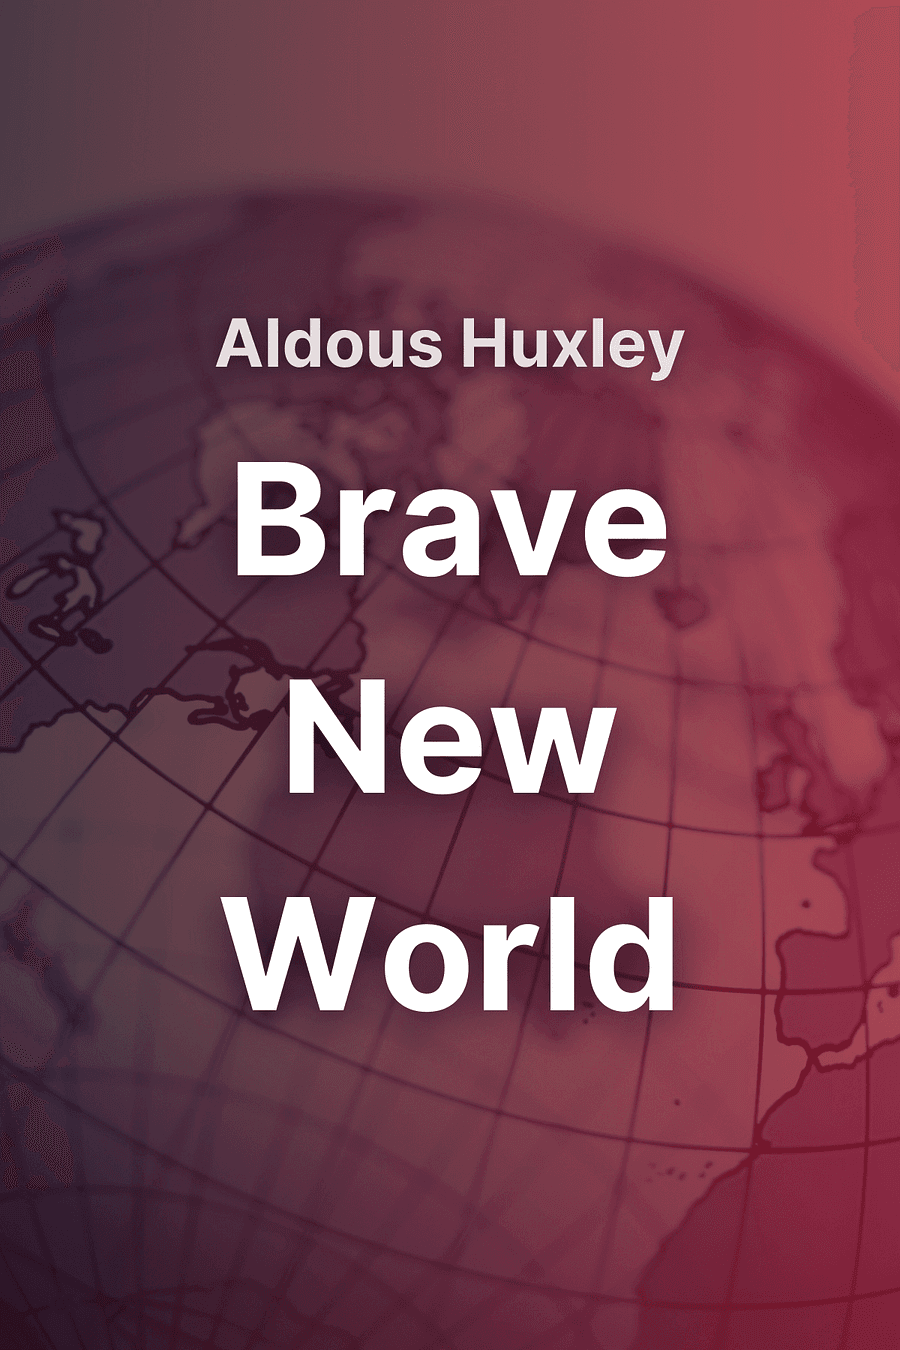 Brave New World by Aldous Huxley - Book Summary